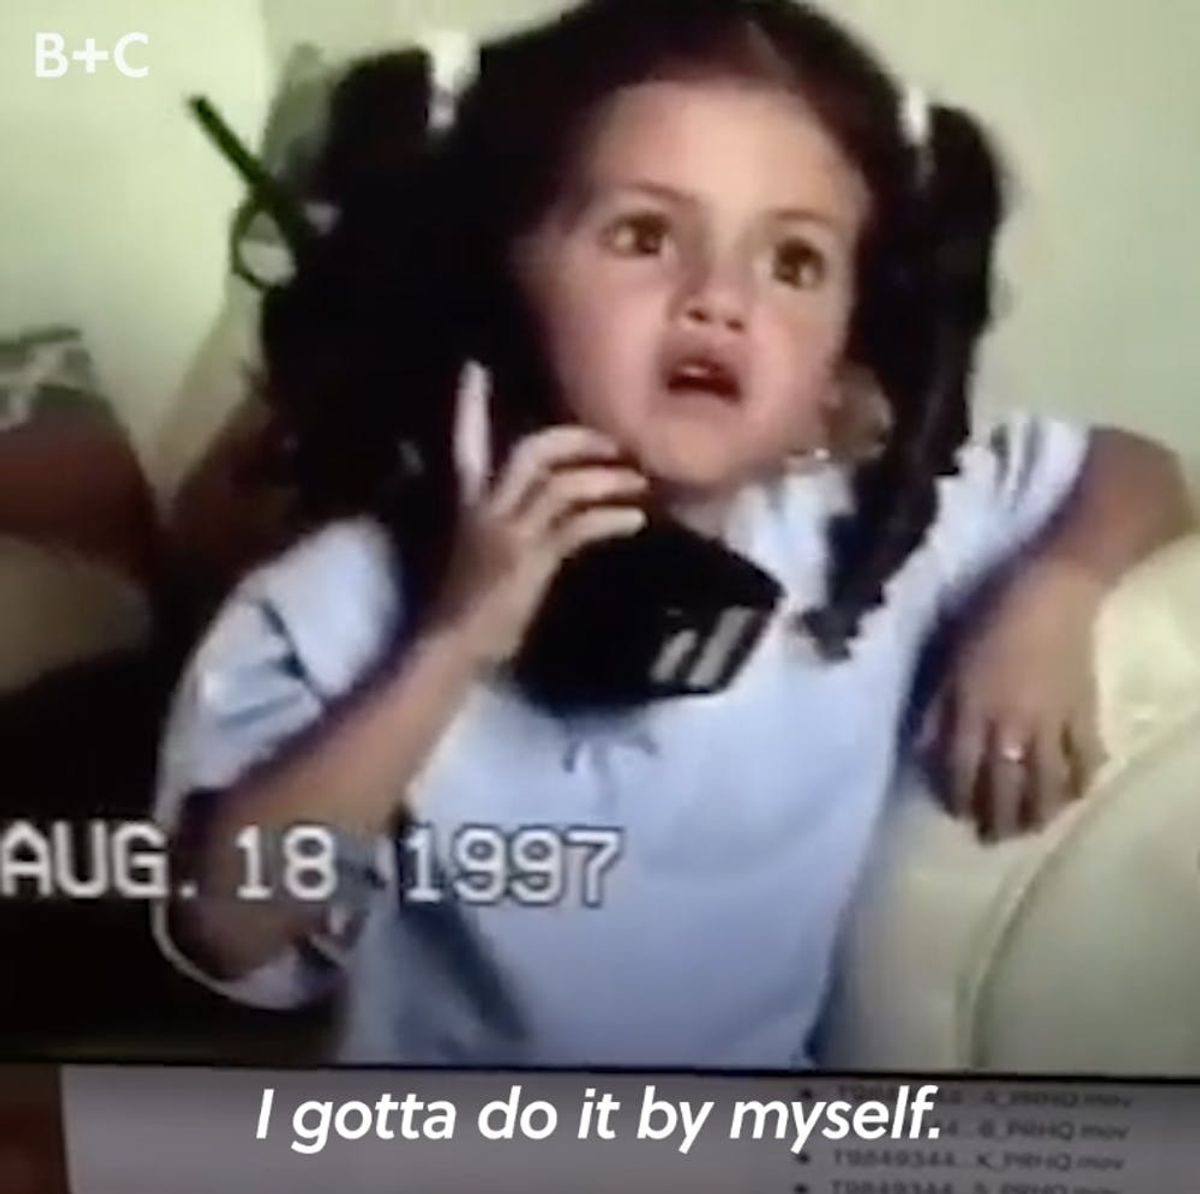 These Celebrity Home Videos Are the Cutest Thing You’ll See All Day